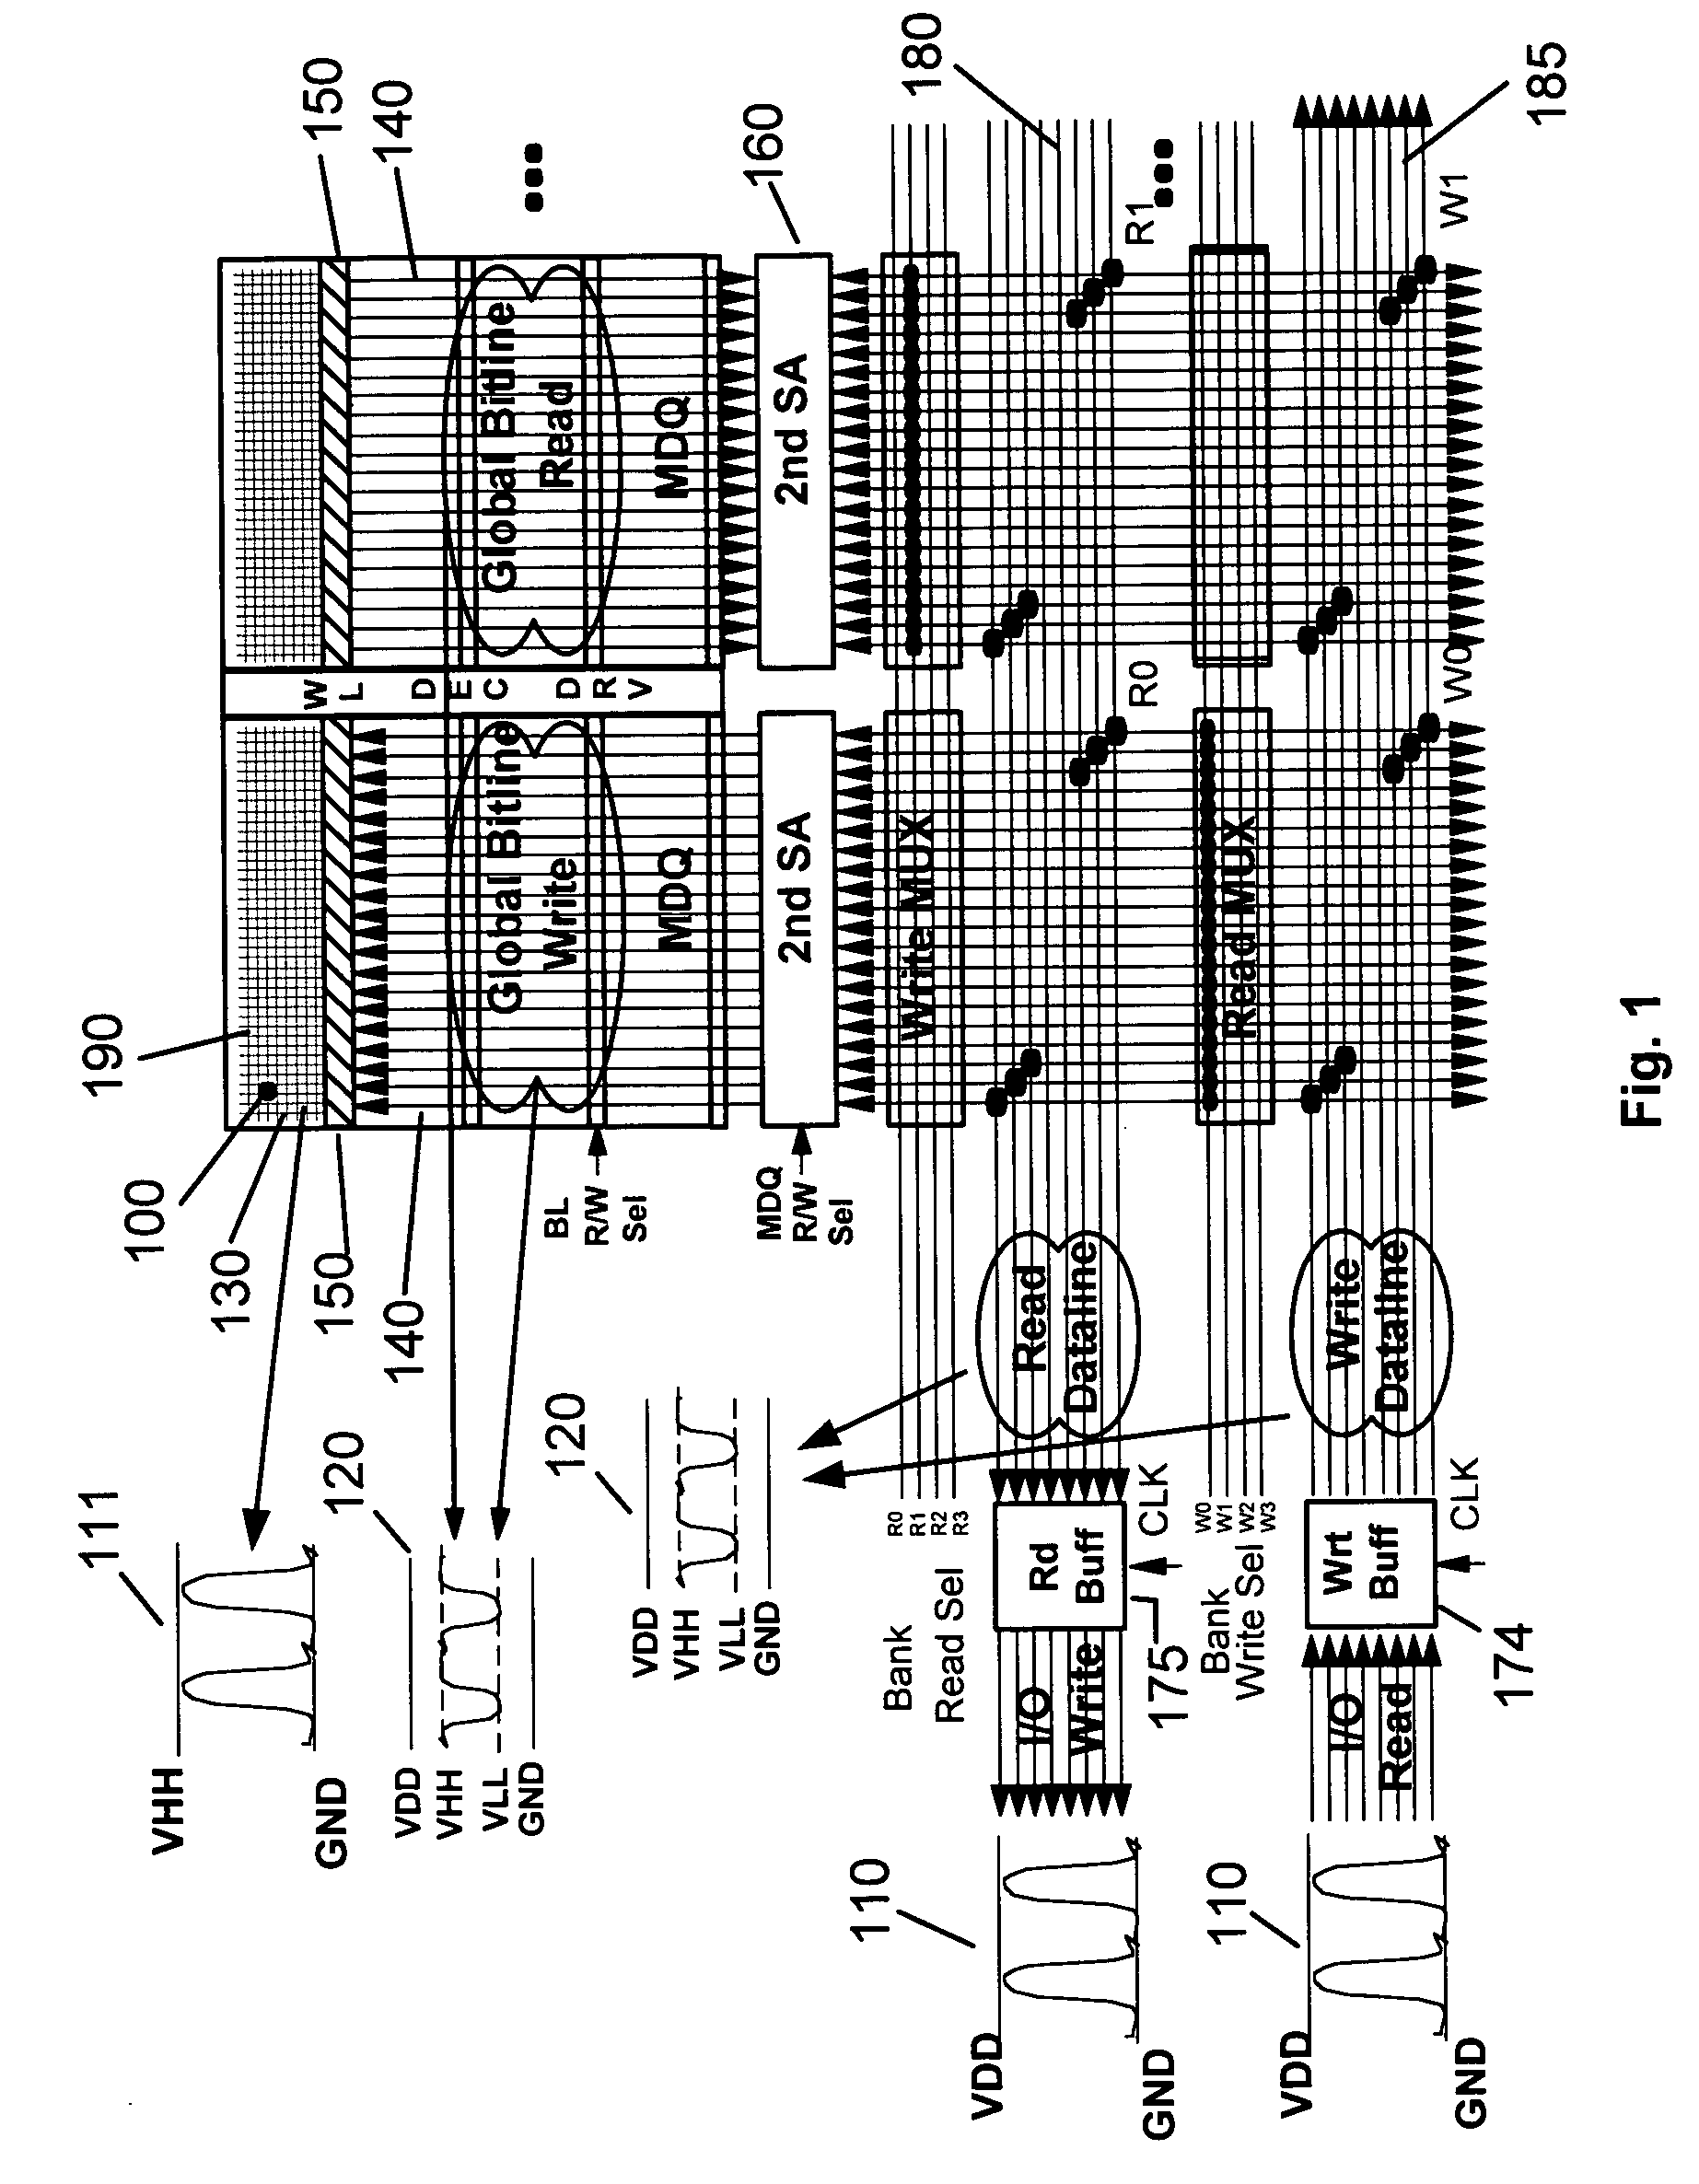 Low power circuits with small voltage swing transmission, voltage regeneration, and wide bandwidth architecture